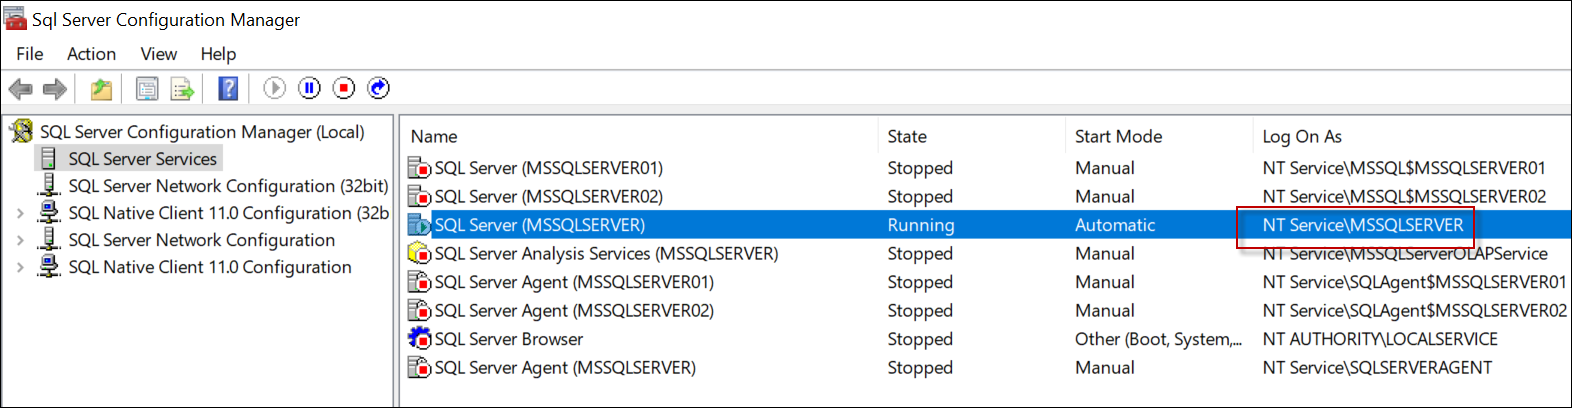 Image of Necessary Permissions to start service